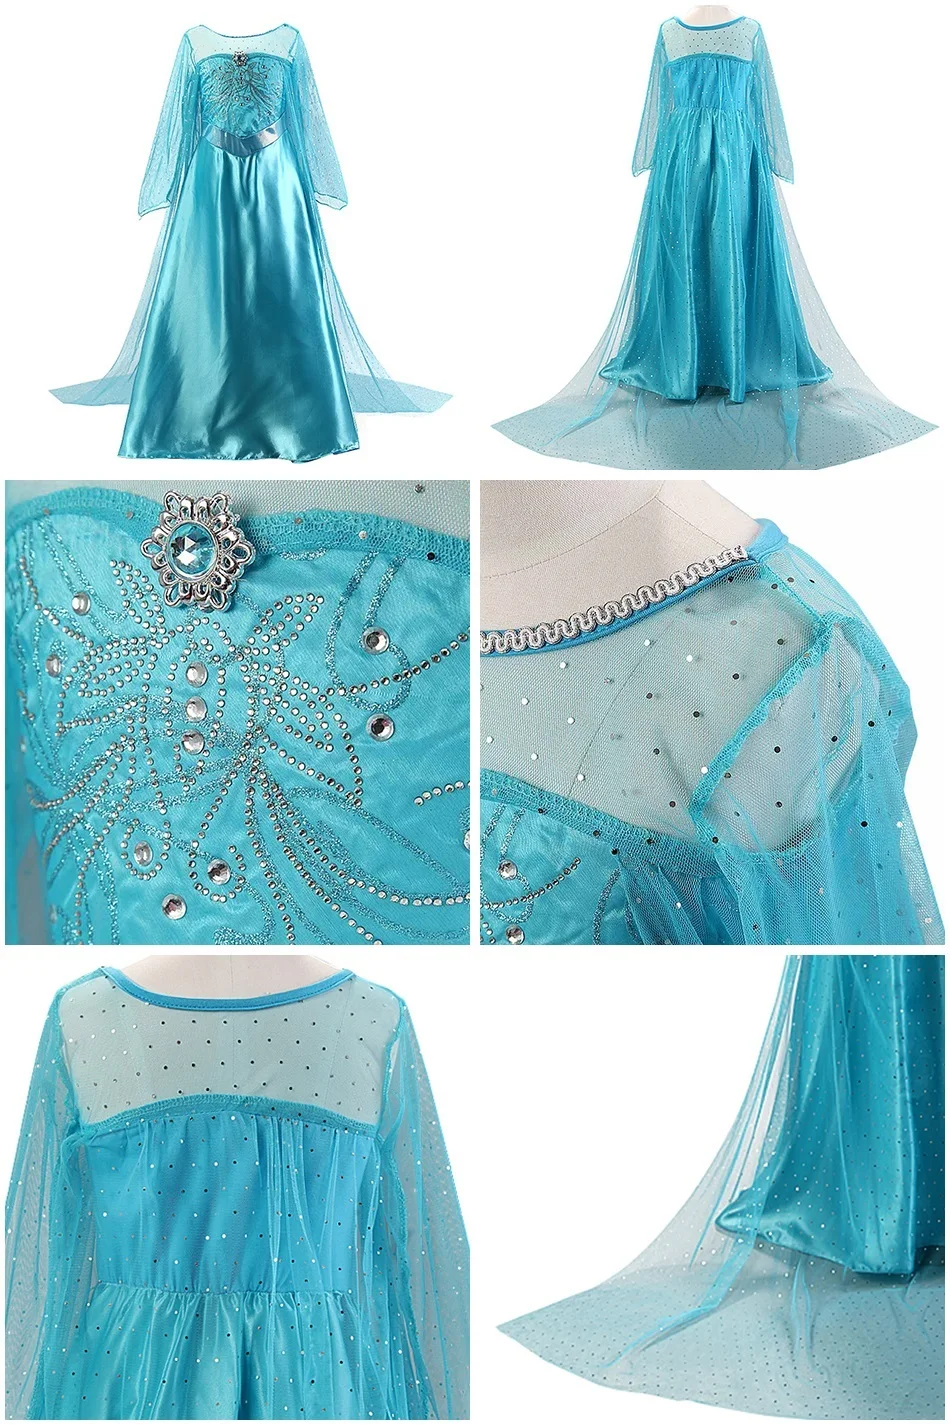 cutest baby dresses 3 5 6 8 10 Years Girls Snow Queen Elsa 2 Dress Kids Halloween White Princess Costume Children Birthday Party Frocks Clothes Up skirt for baby girl